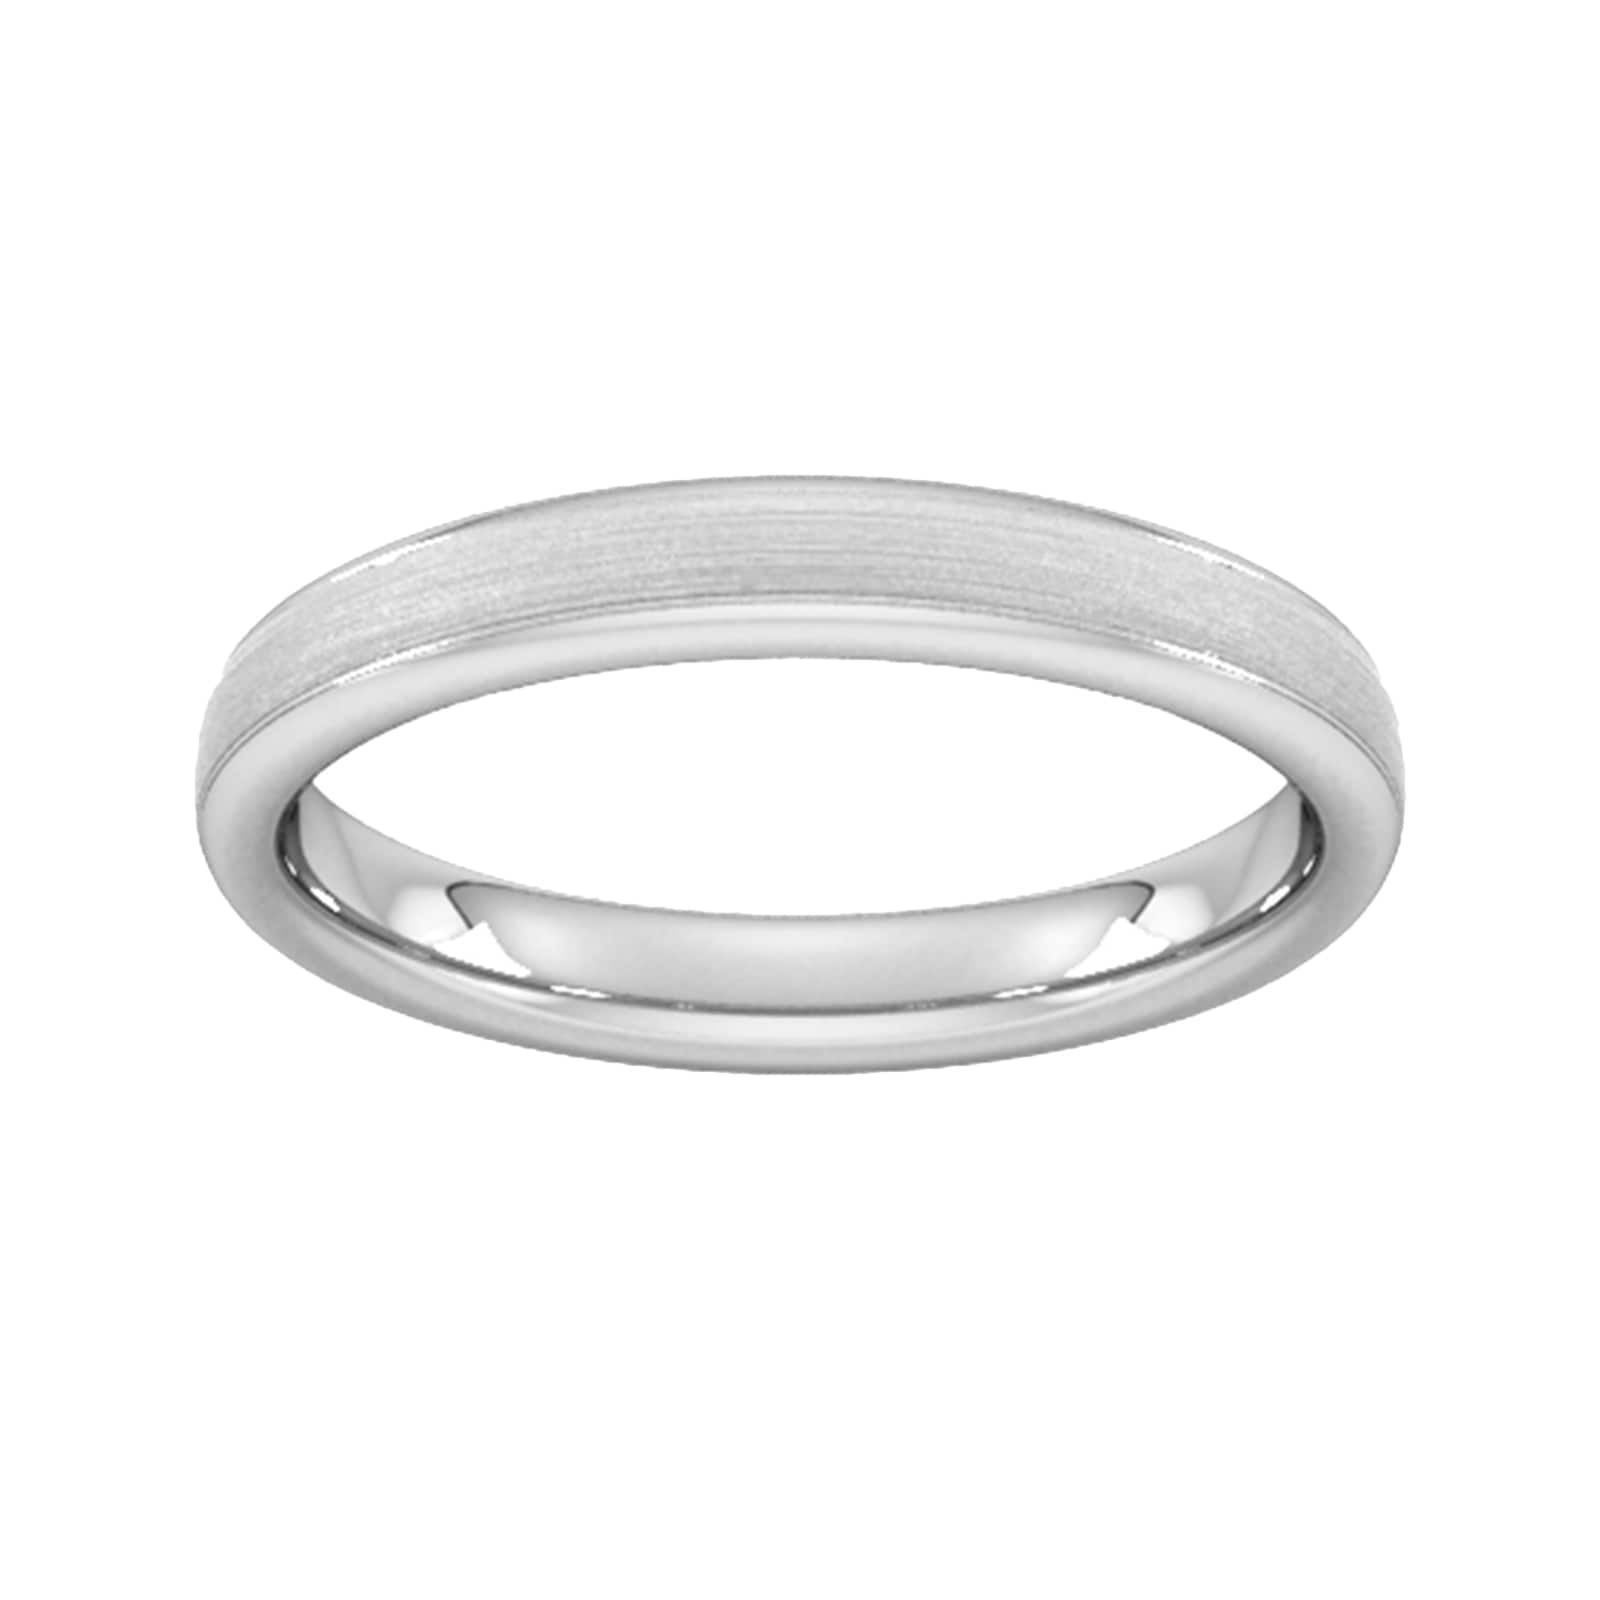 3mm D Shape Heavy Matt Centre With Grooves Wedding Ring In Platinum - Ring Size U